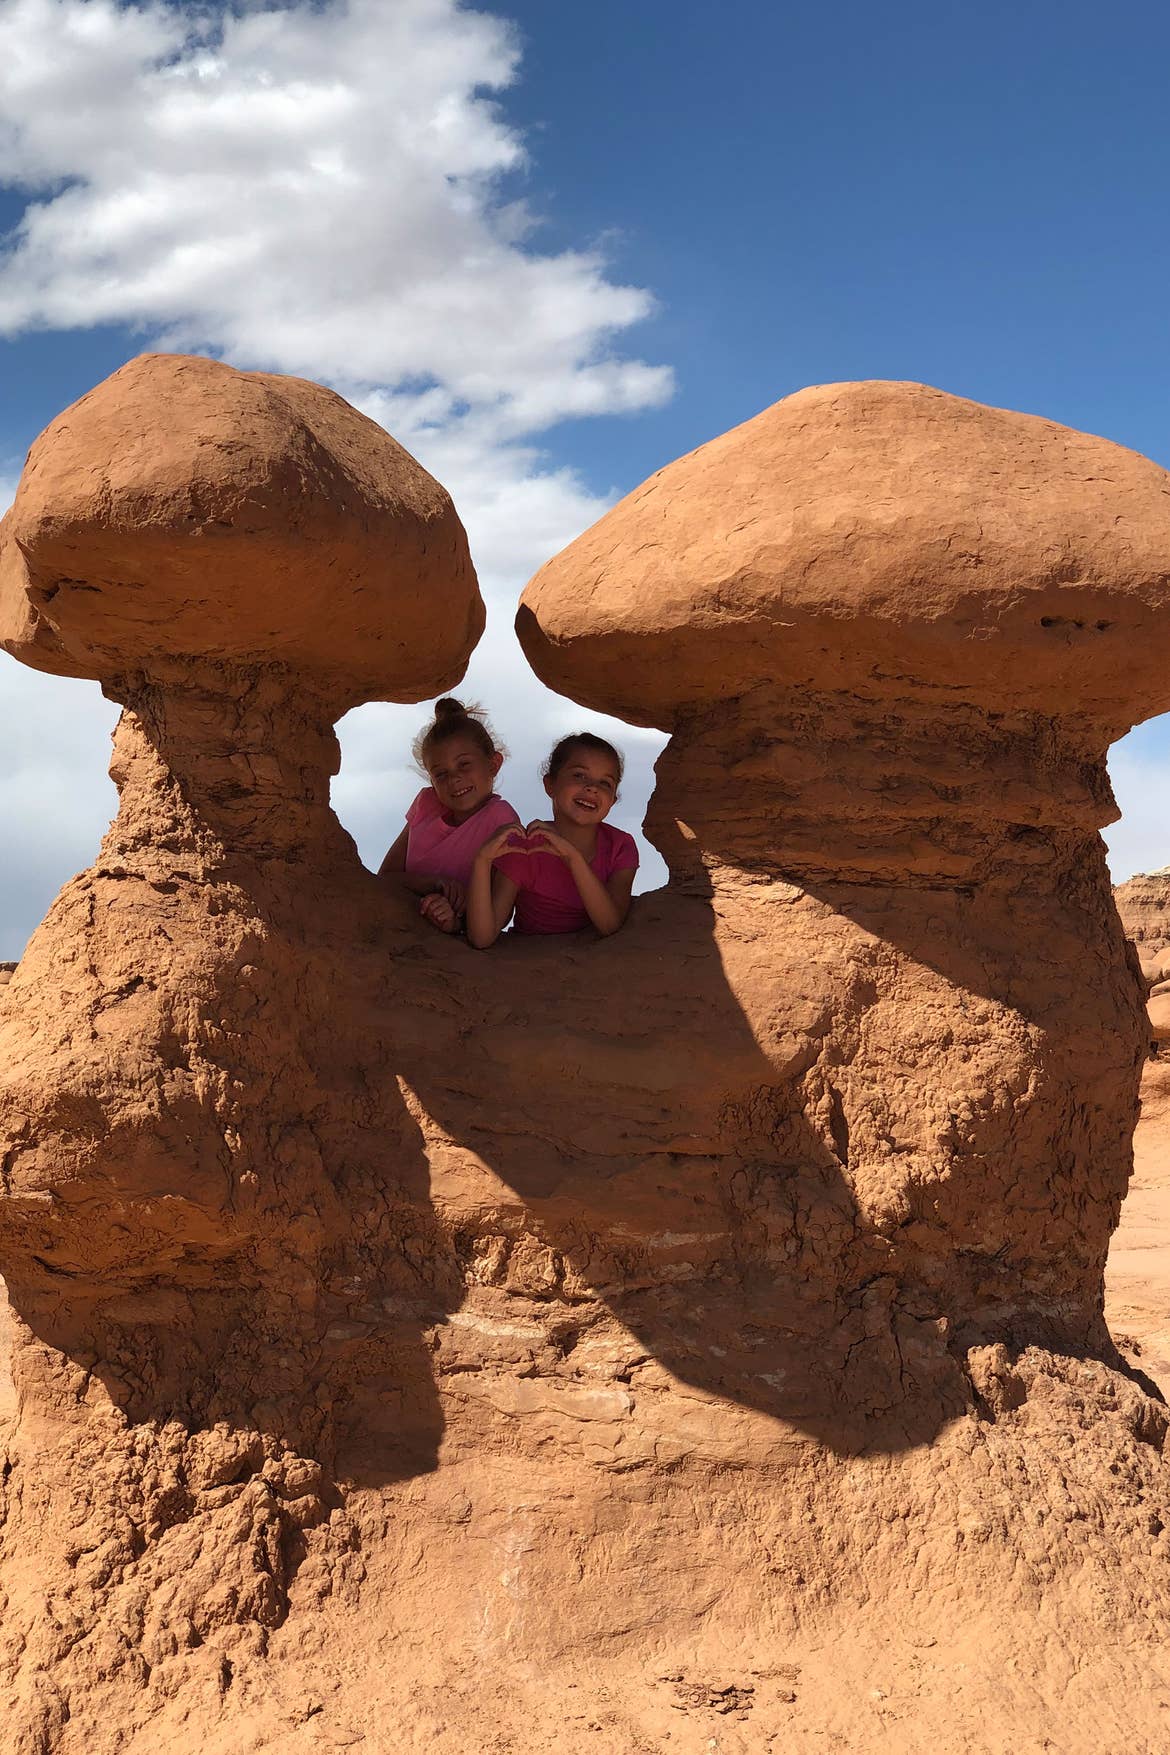 Kyler (left) and Kyndall (right) stand in-between the 'Sandcastle' rock formation at Goblin Valley State Park.